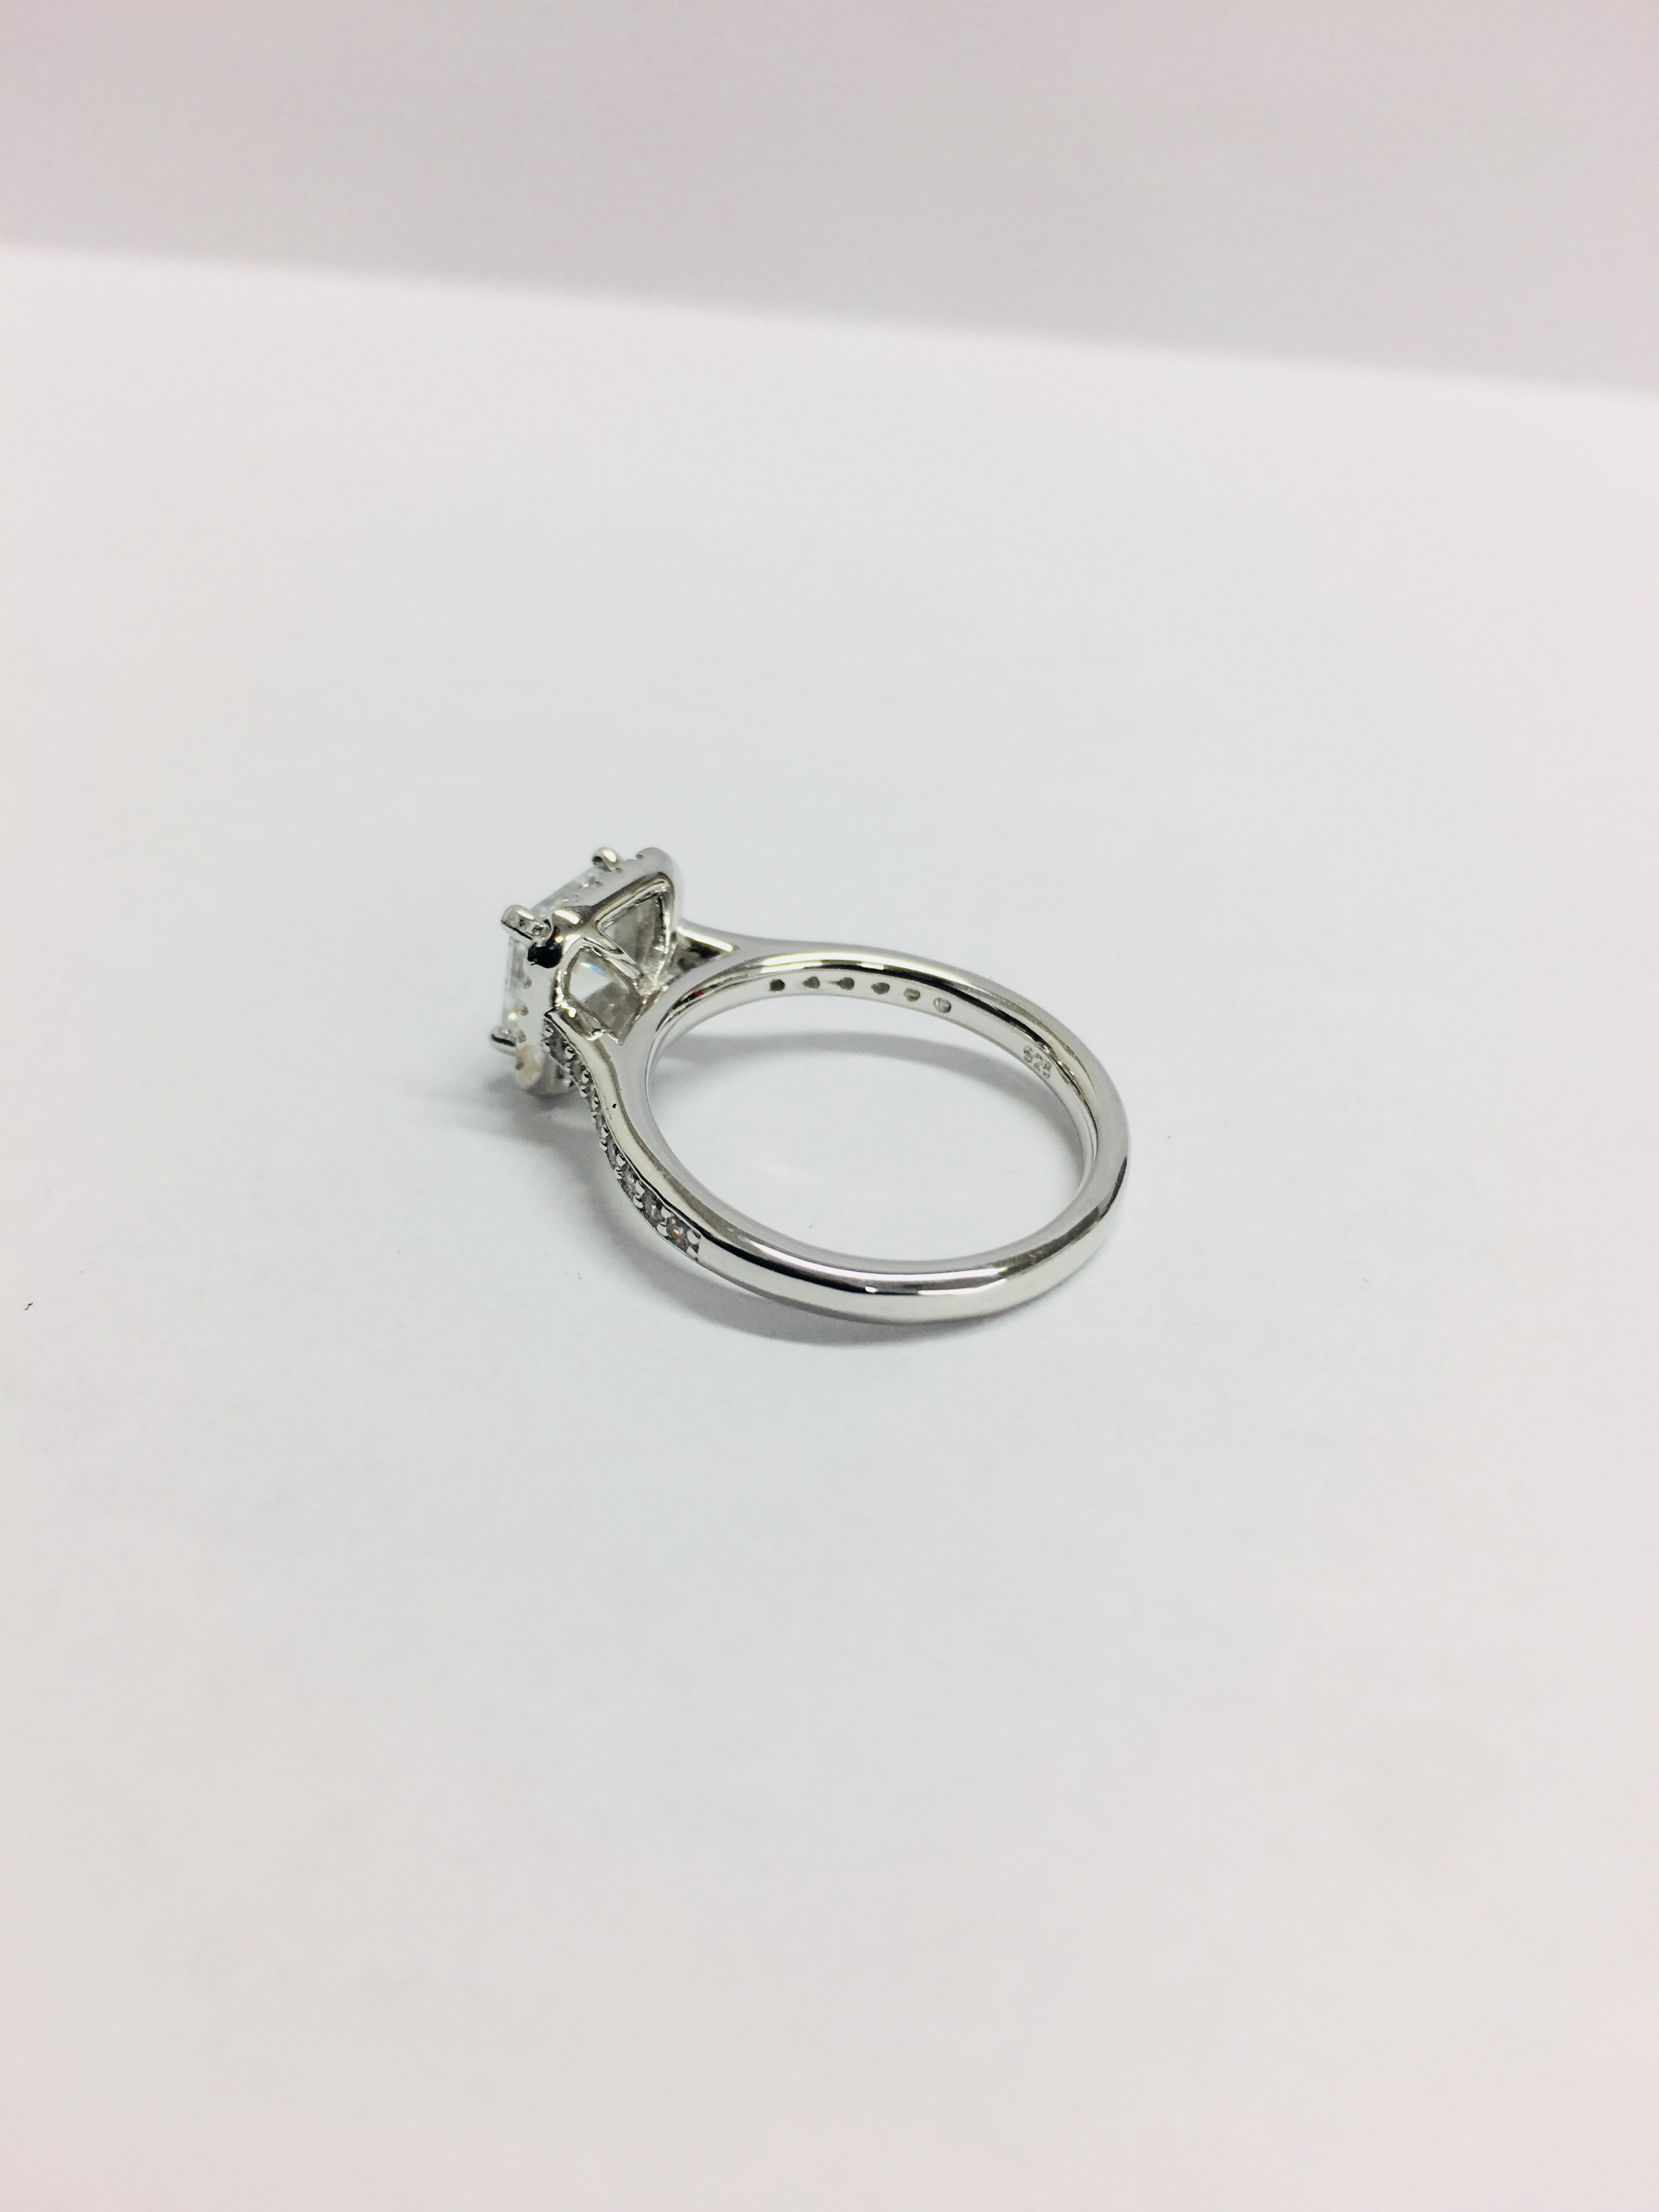 1.00CTct diamond set solitaire ring with a princess cut diamond - Image 5 of 6